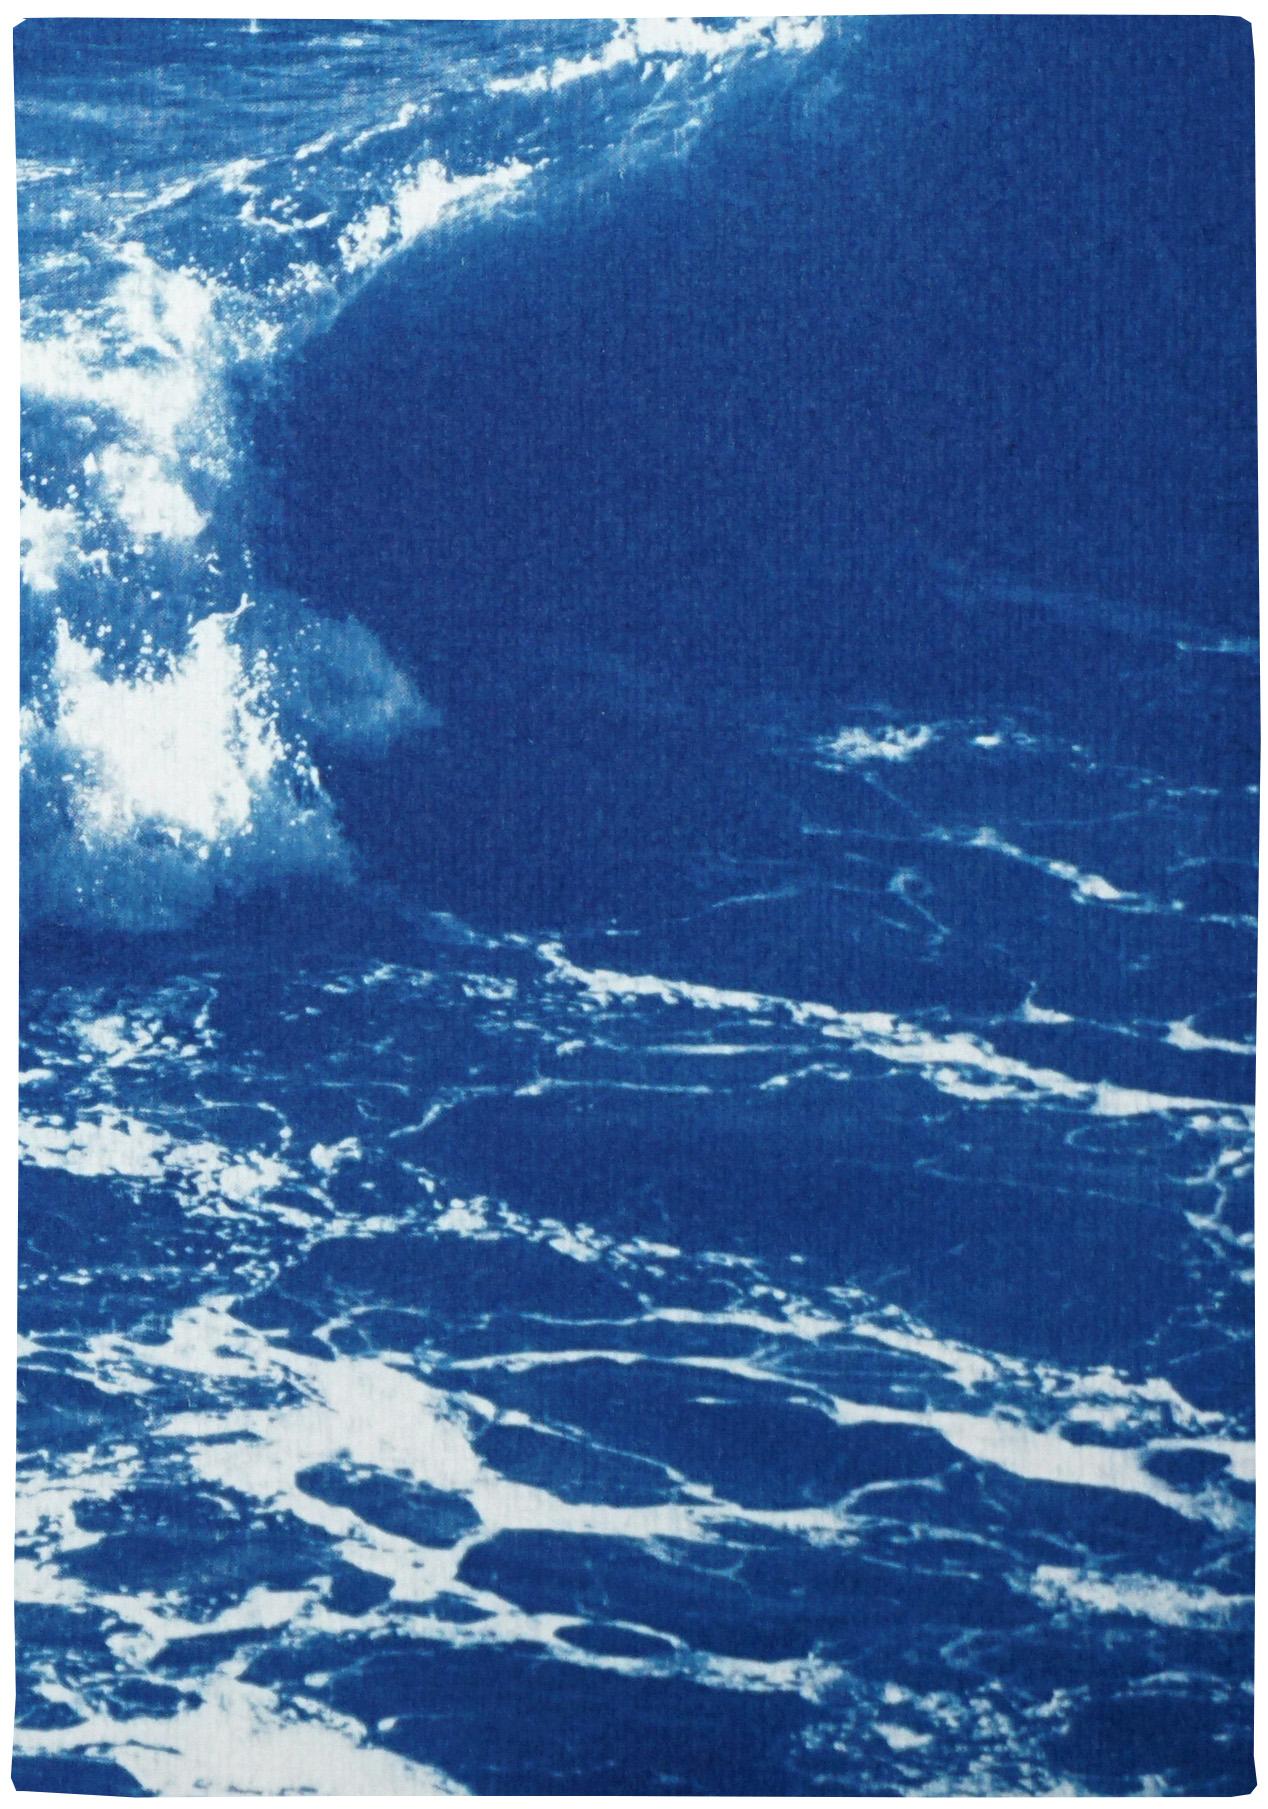 This is an exclusive handprinted limited edition cyanotype.

This blue and white triptych shows vigorous waves in Bells Beach, one of the most iconic shores in Australia. 

Details:
+ Title: Australian Rolling Waves
+ Year: 2020
+ Edition Size: